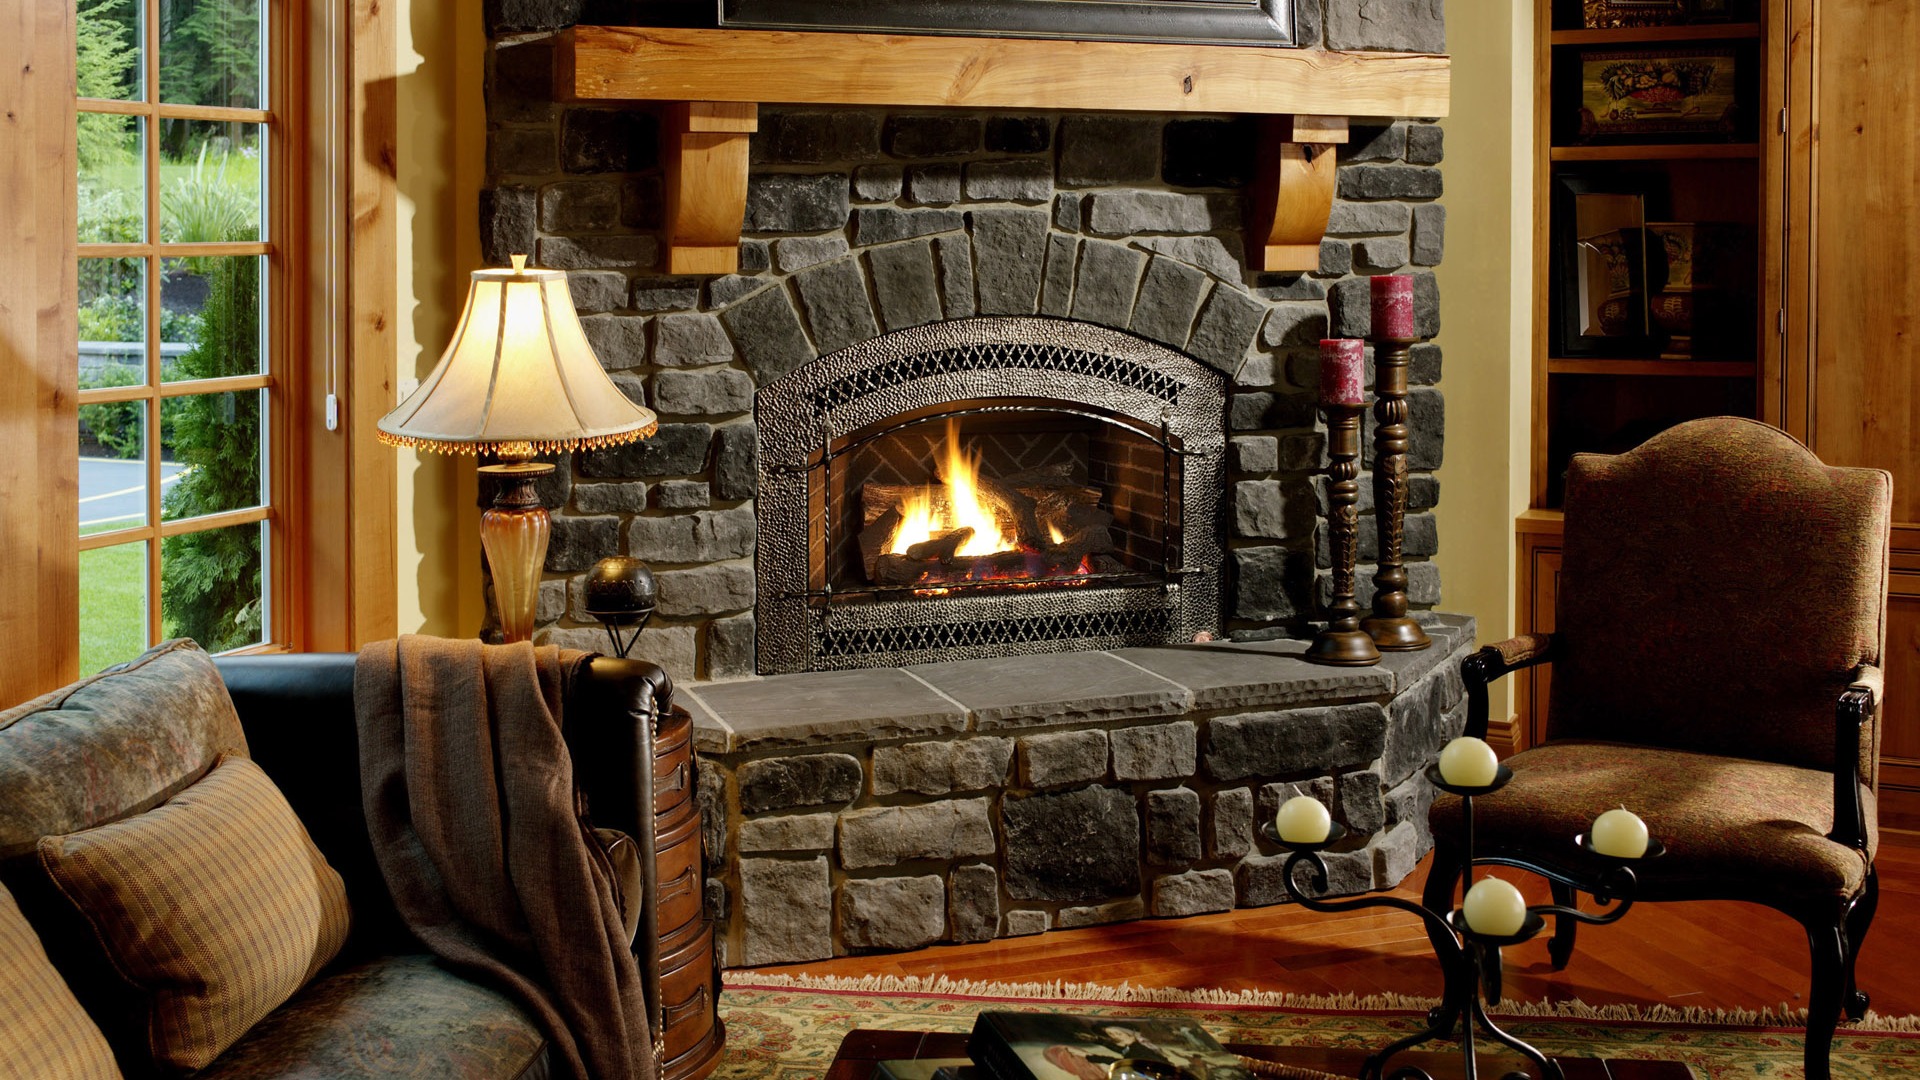 Western-style family fireplace wallpaper (1) #19 - 1920x1080